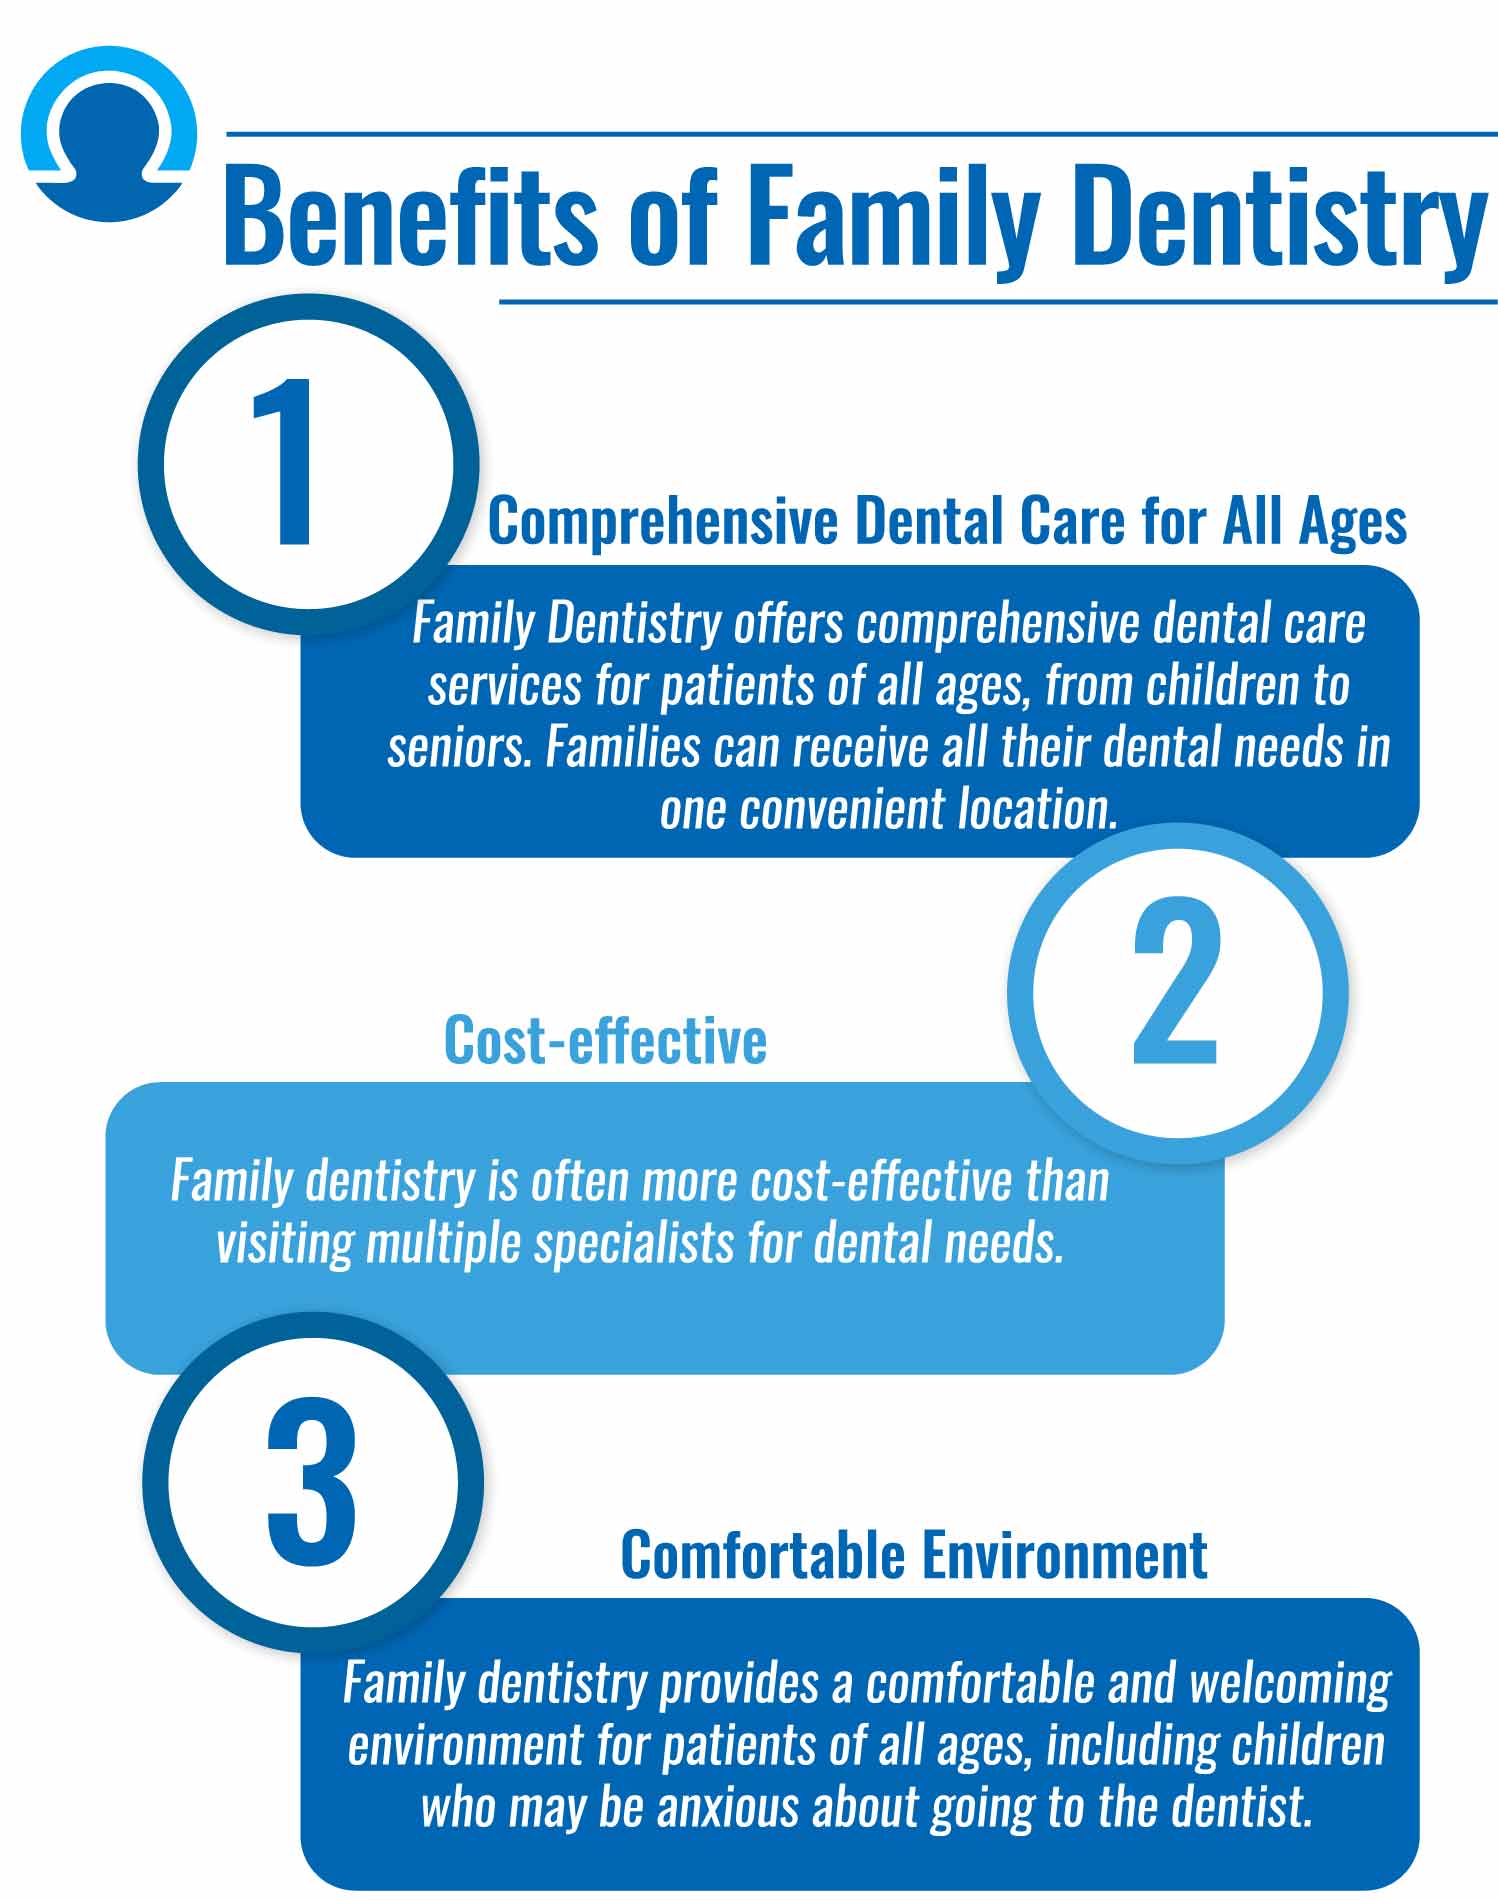 Benefits of Family Dentistry